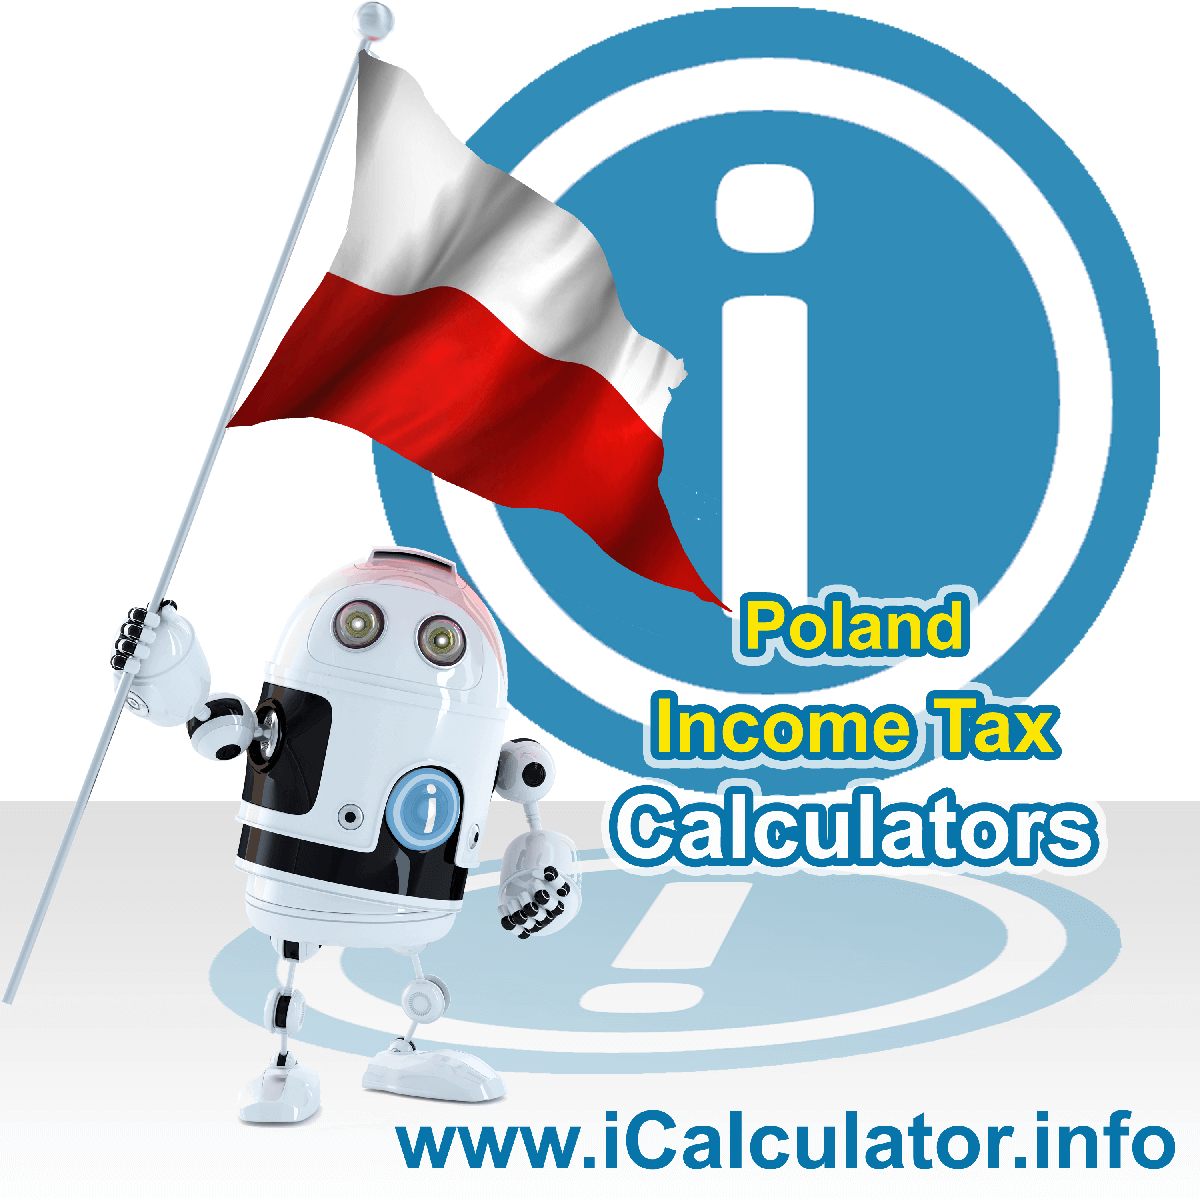 Poland Income Tax Calculator. This image shows a new employer in Poland calculating the annual payroll costs based on multiple payroll payments in one year in Poland using the Poland income tax calculator to understand their payroll costs in Poland in 2022